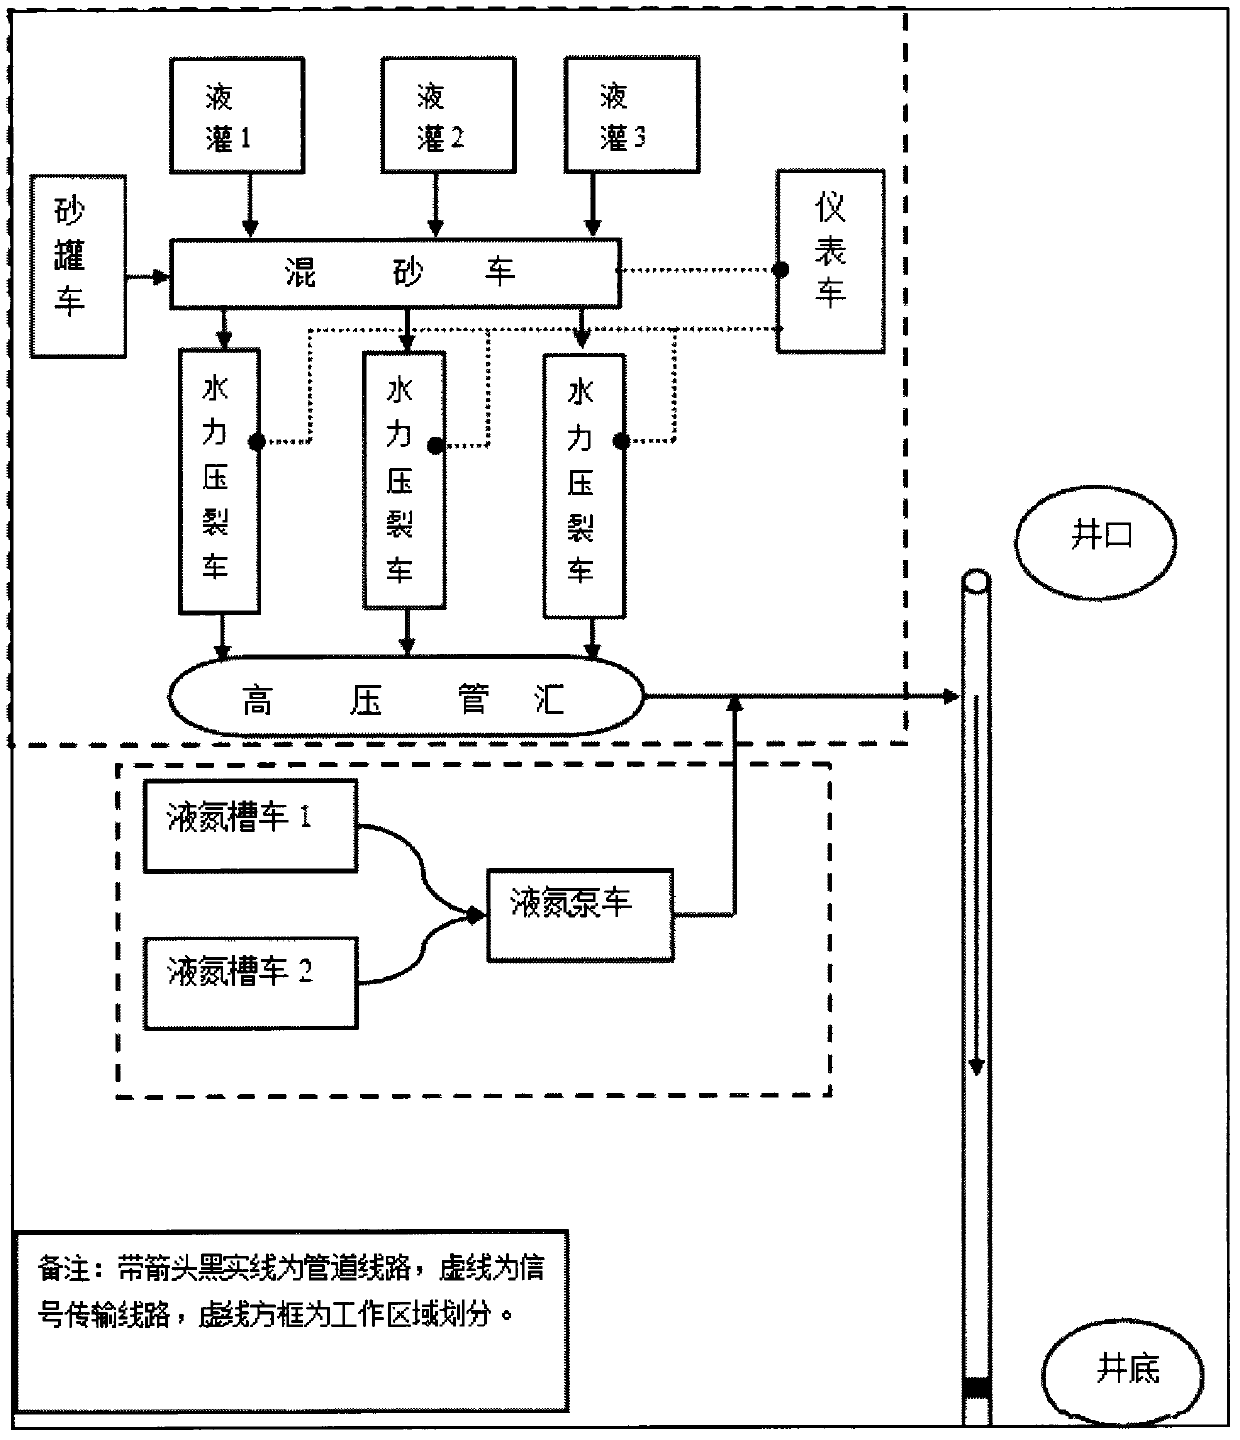 Method and equipment for reducing pollution through nitrogen foam fracturing of coal-bed gas well of low-pressure and low-permeability reservoir